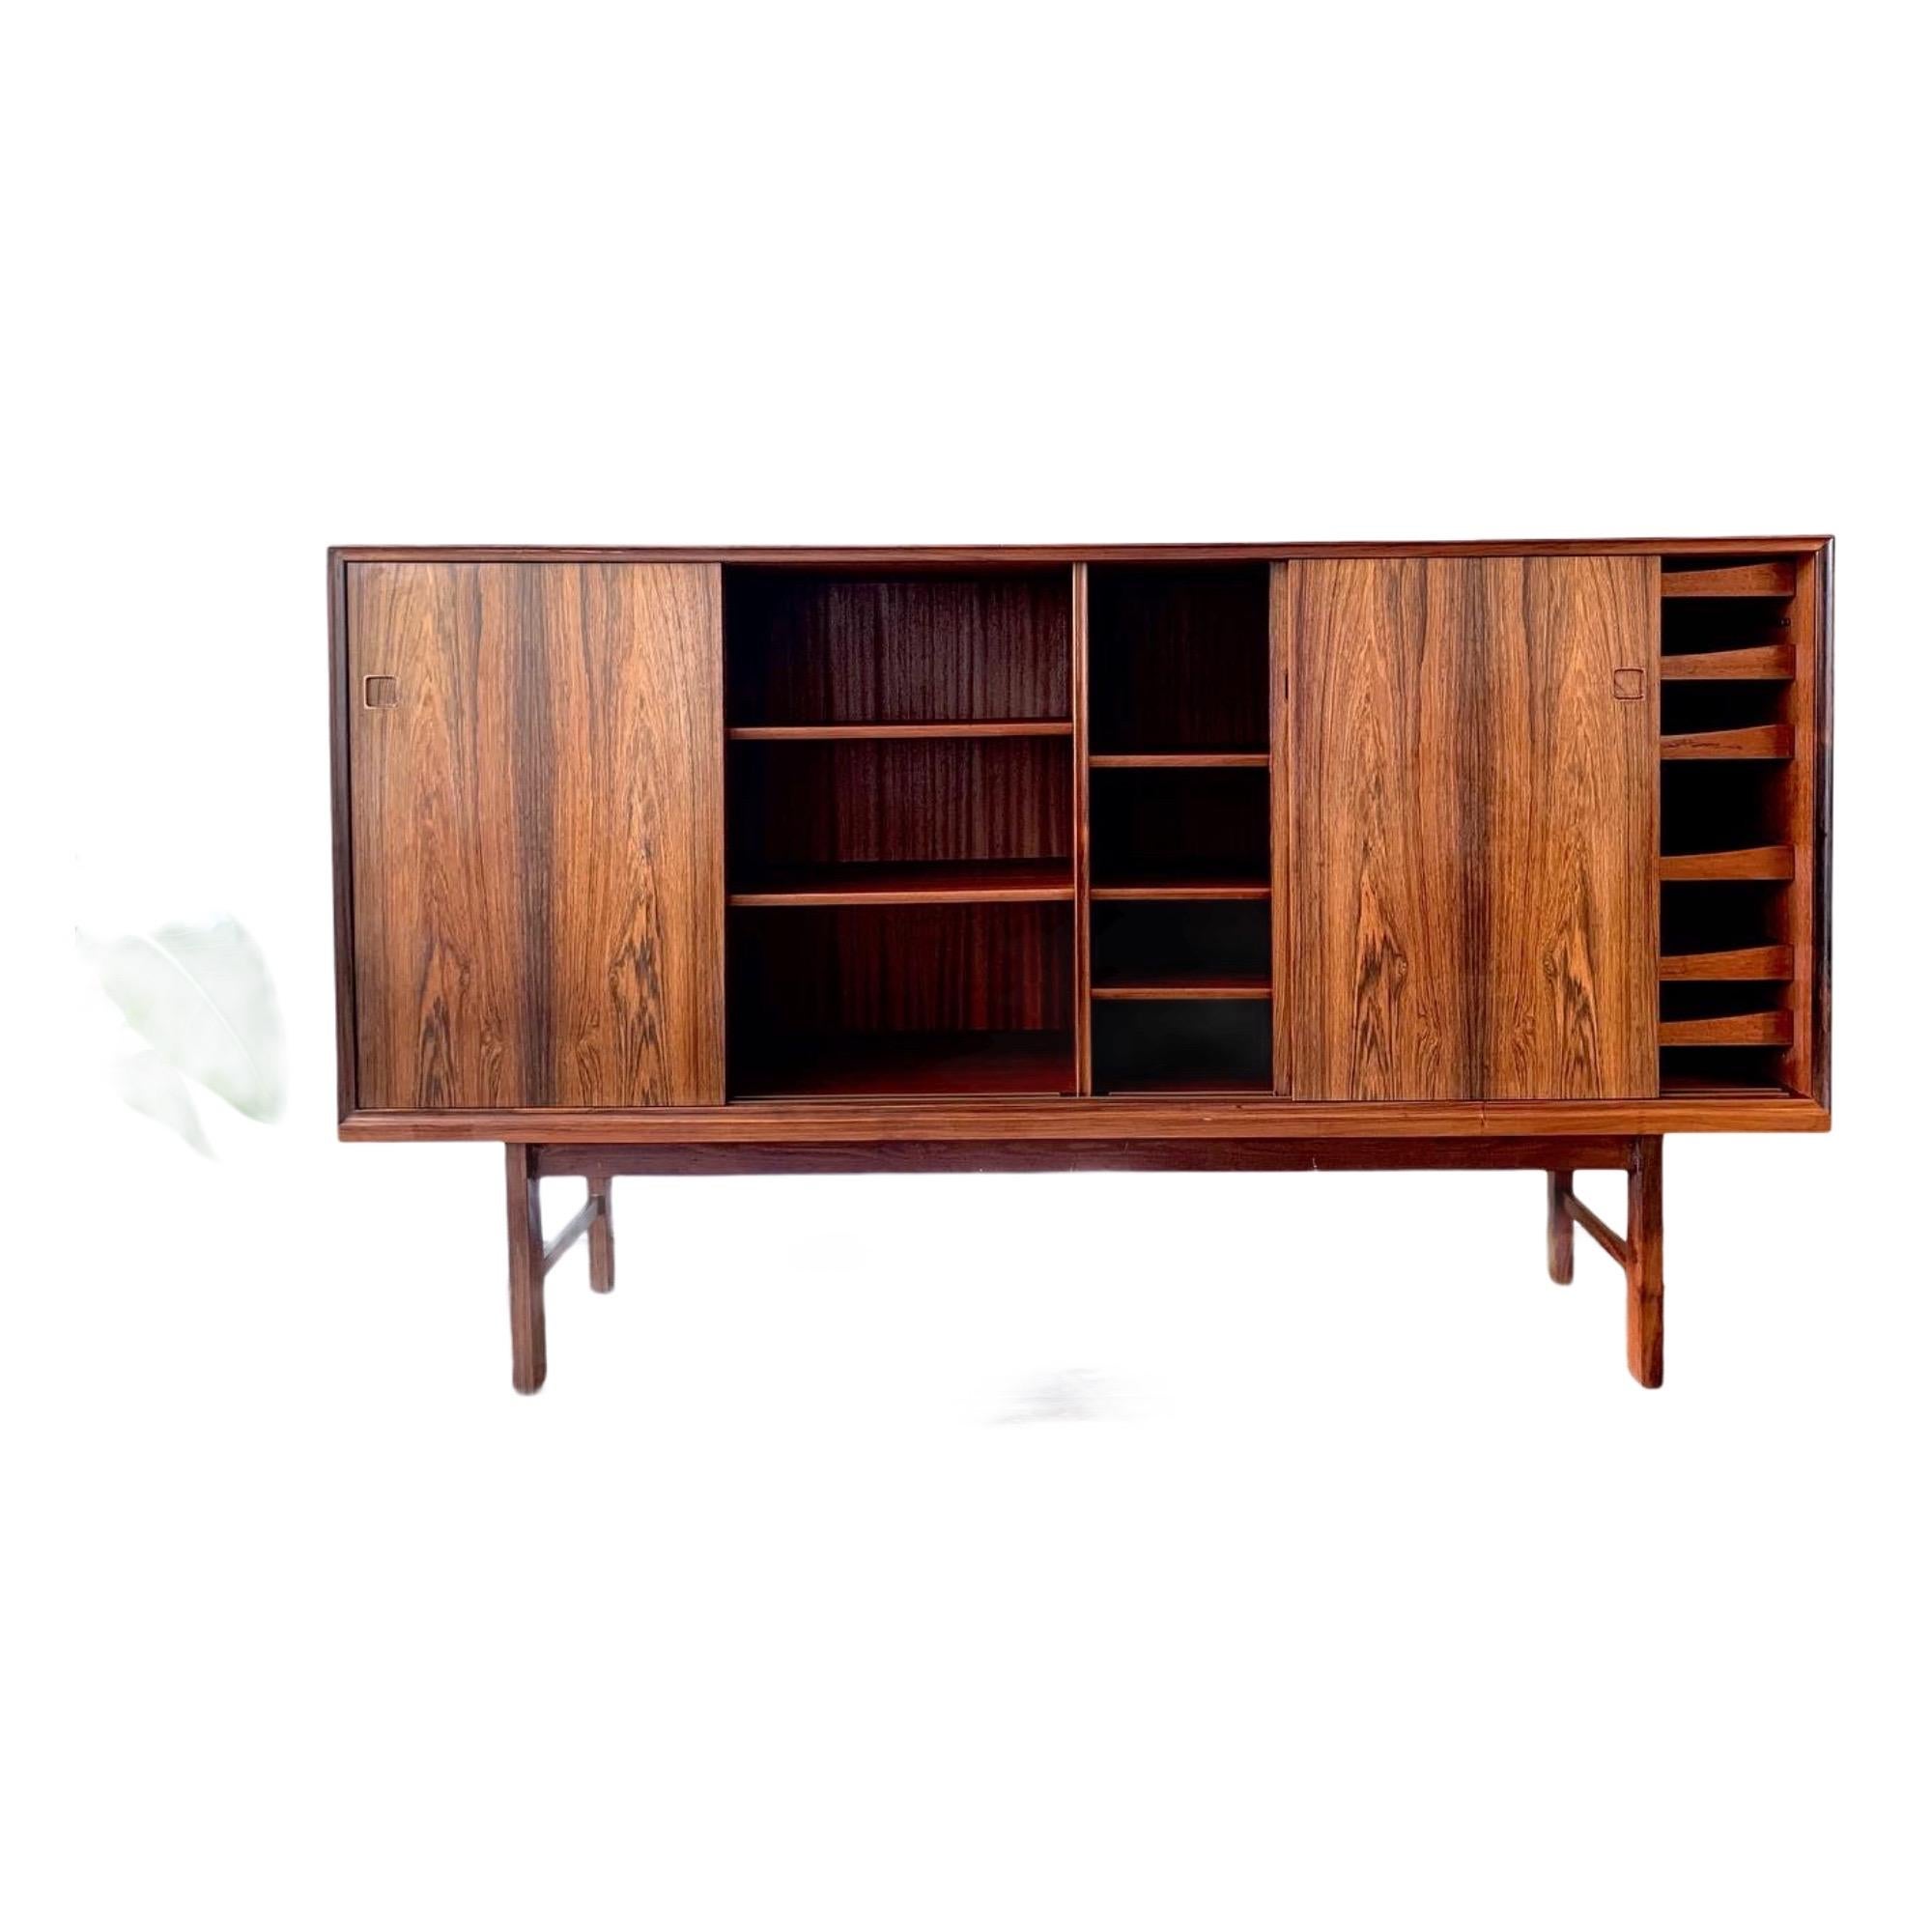 Danish midcentury rosewood credenza (does not ship to the US).